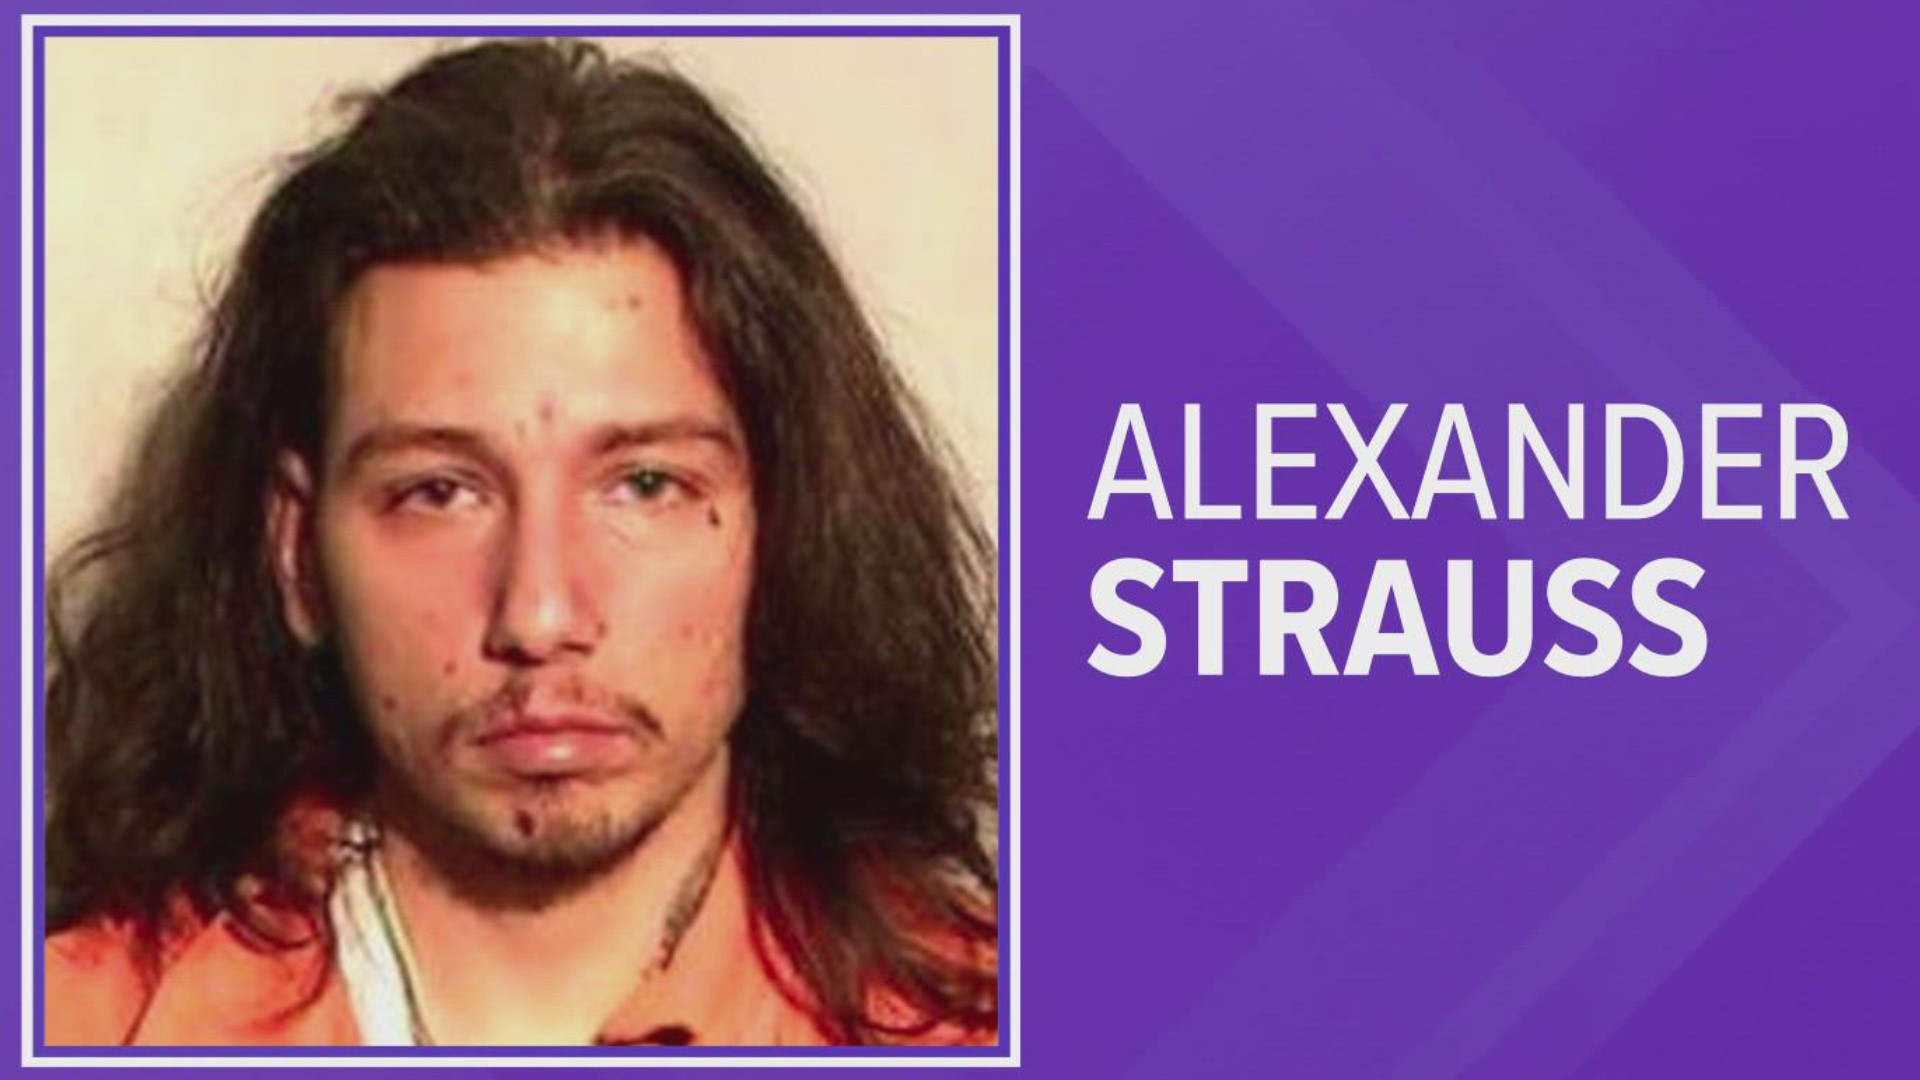 32-year-old Alexander Strauss is also a person of interest in a robbery that occurred in Oregon.